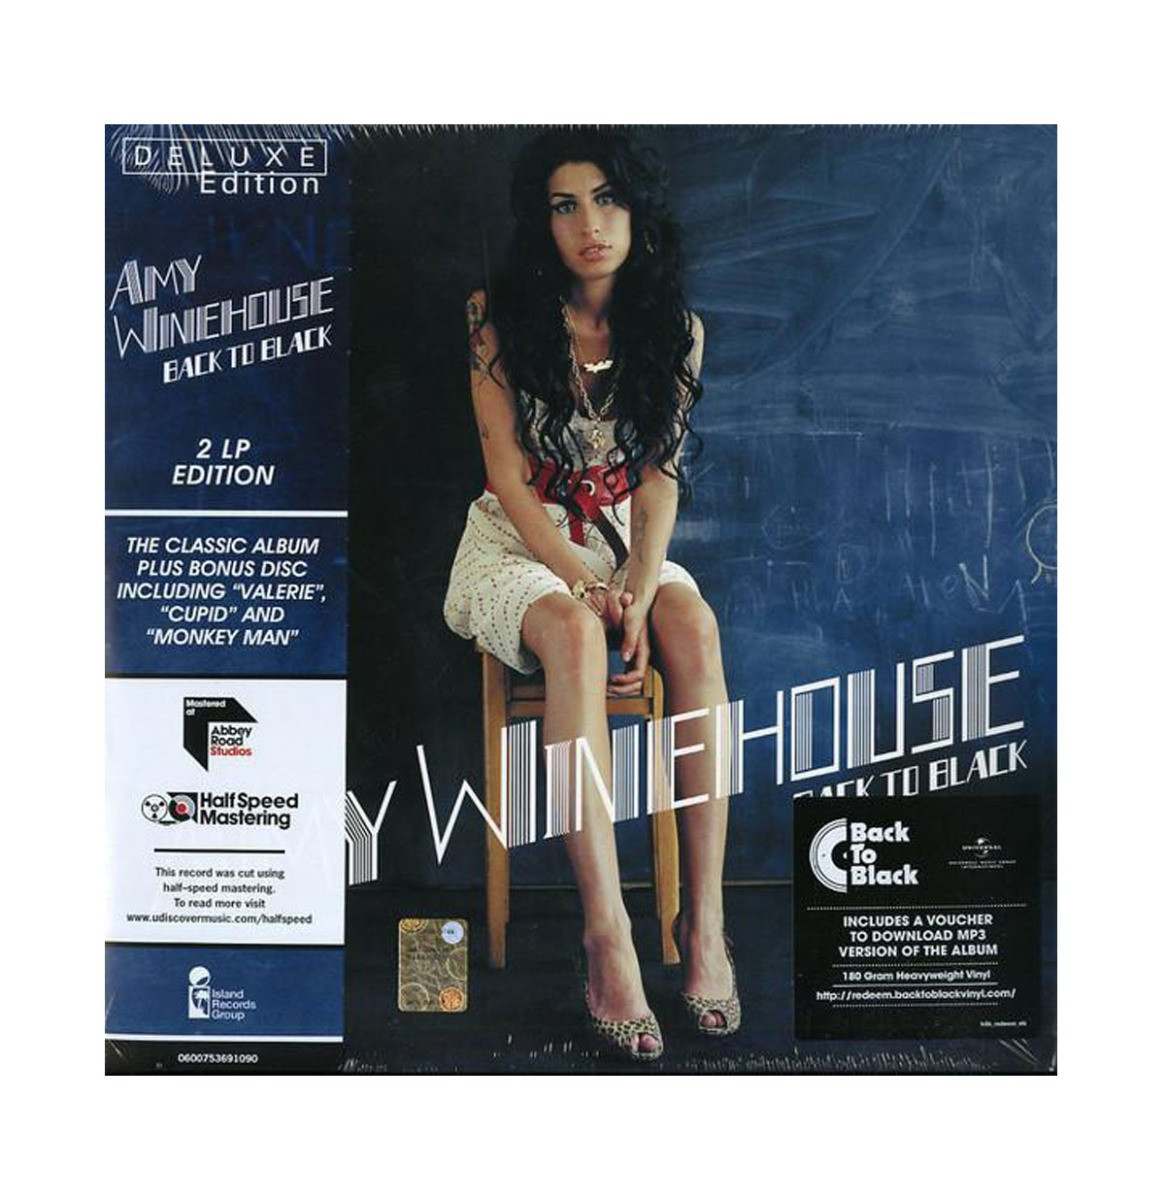 Amy Winehouse - Back to Black (Deluxe Edition Half Speed Mastering) 2LP